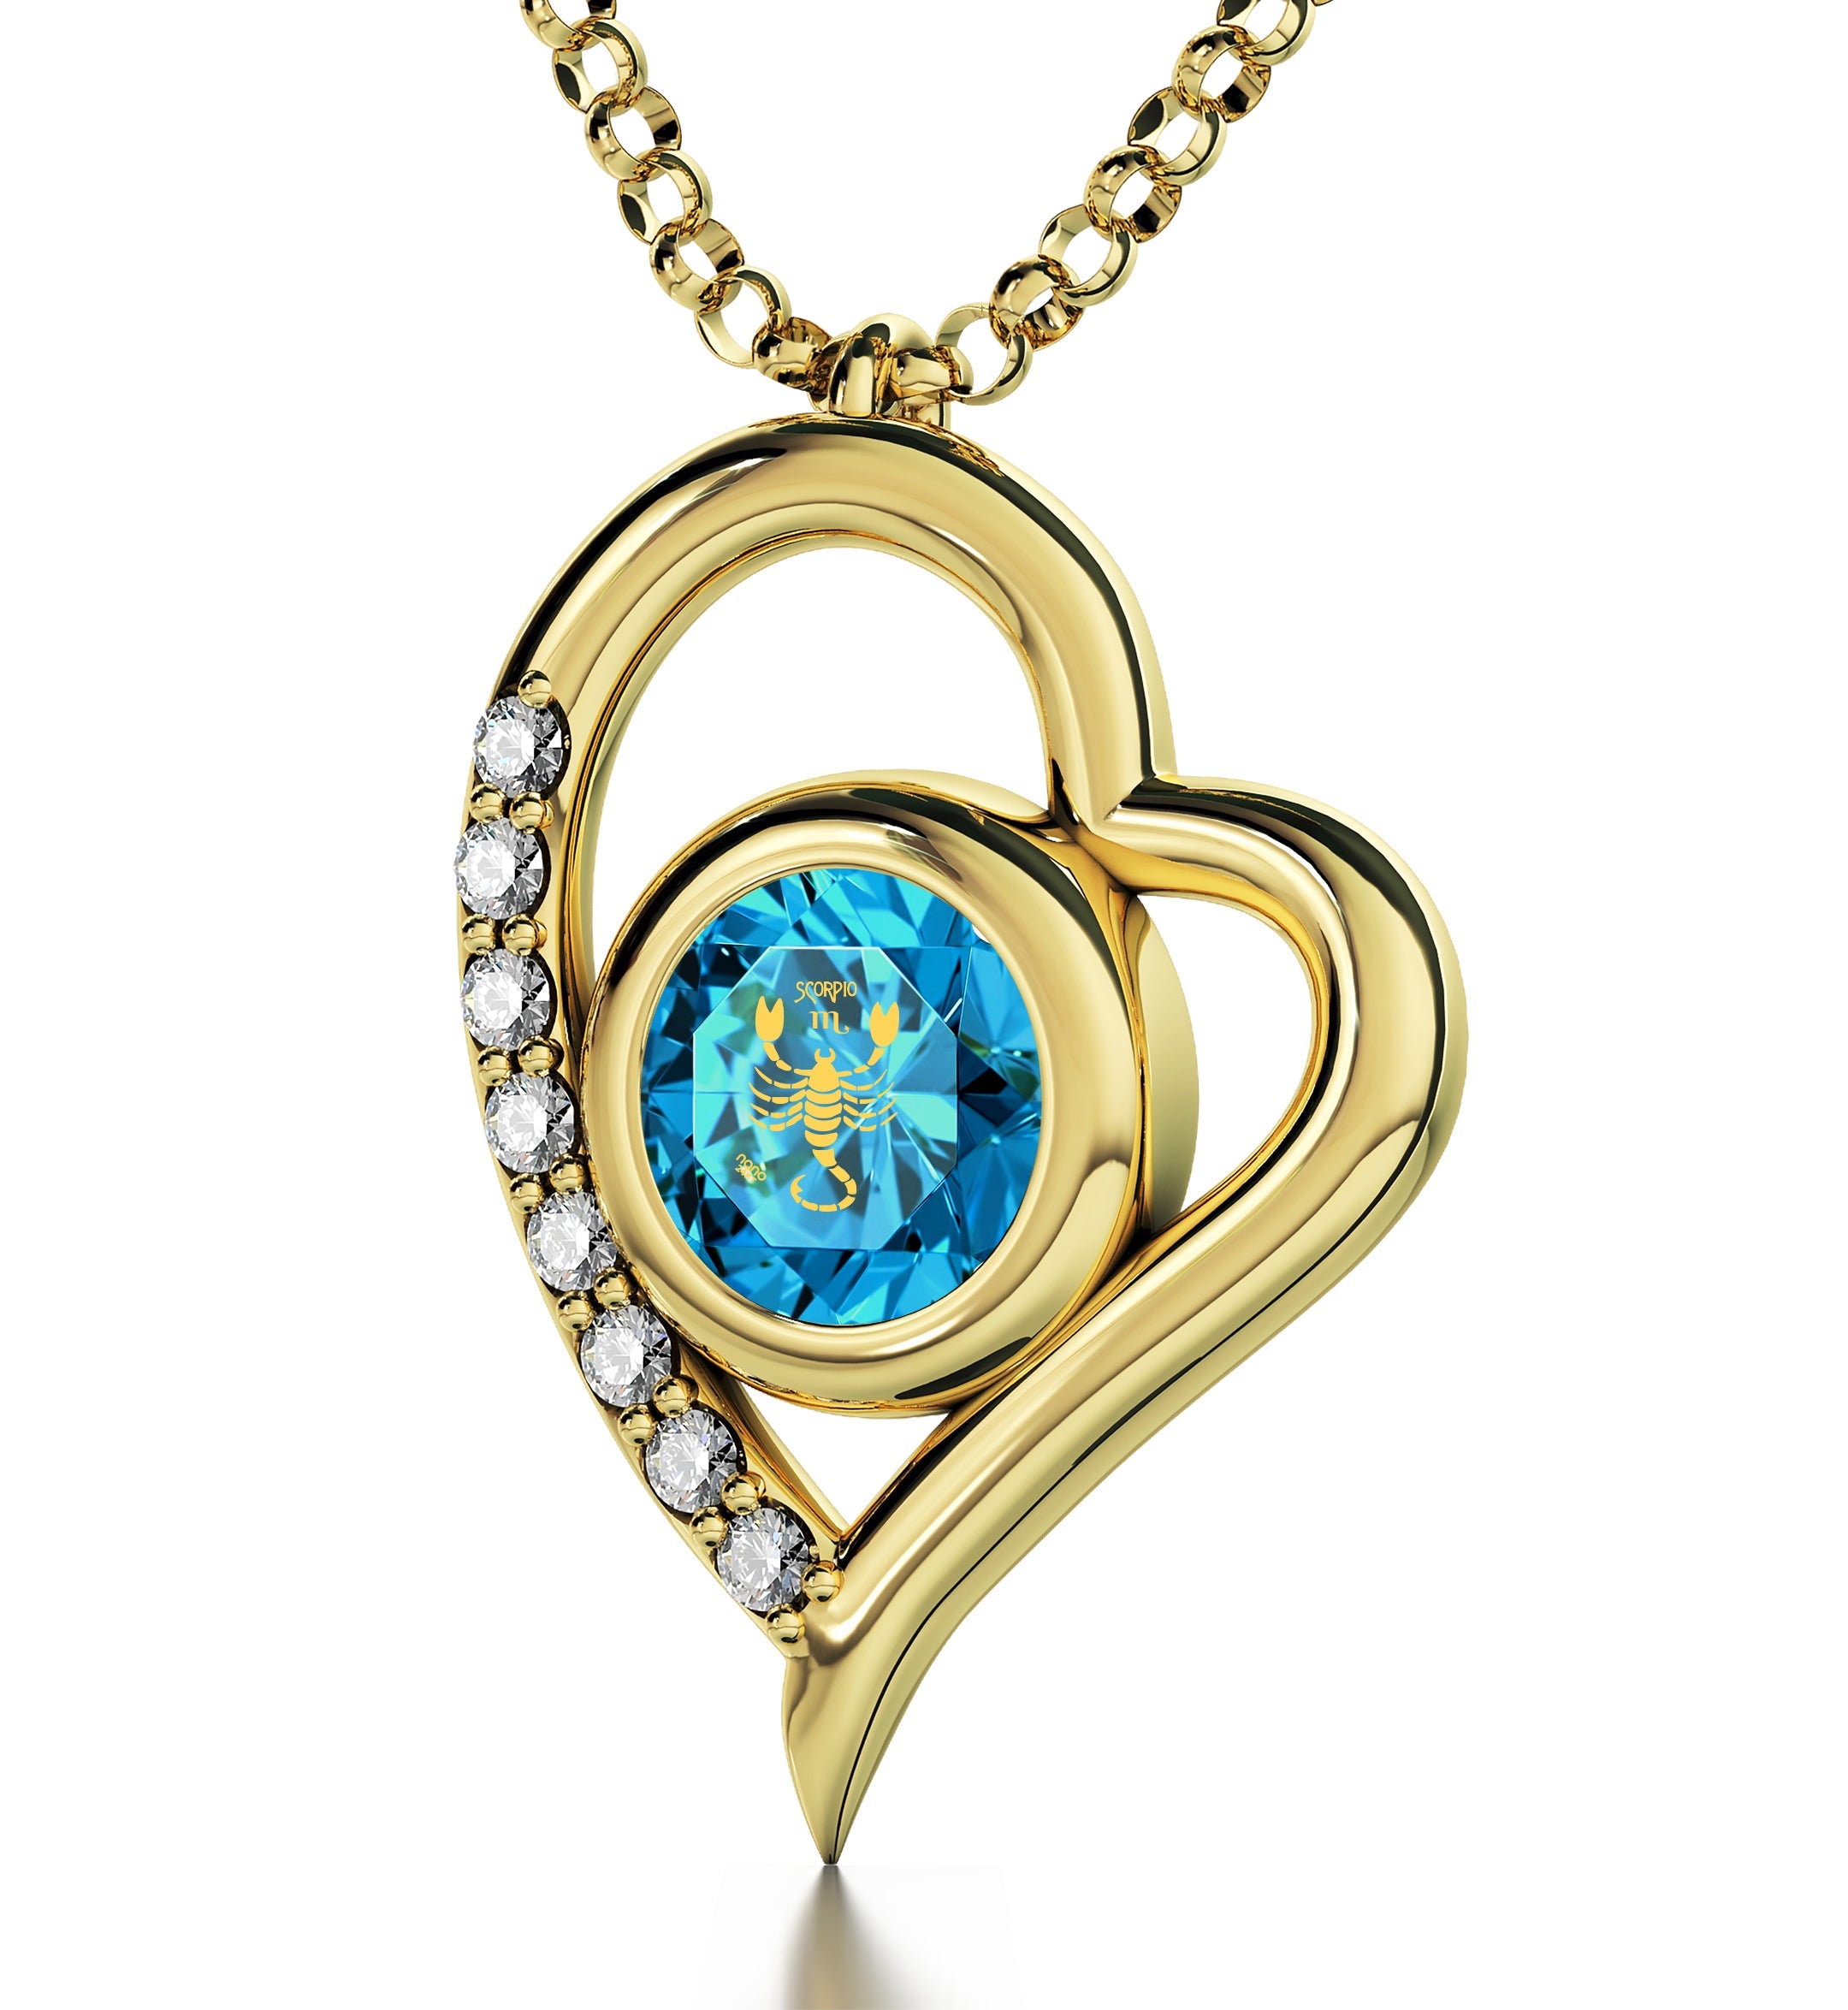 Gold Plated Silver Scorpio Necklace Zodiac Heart Pendant with Swarovski Crystals, on a gold chain, bearing inscriptions on a small attached tag.